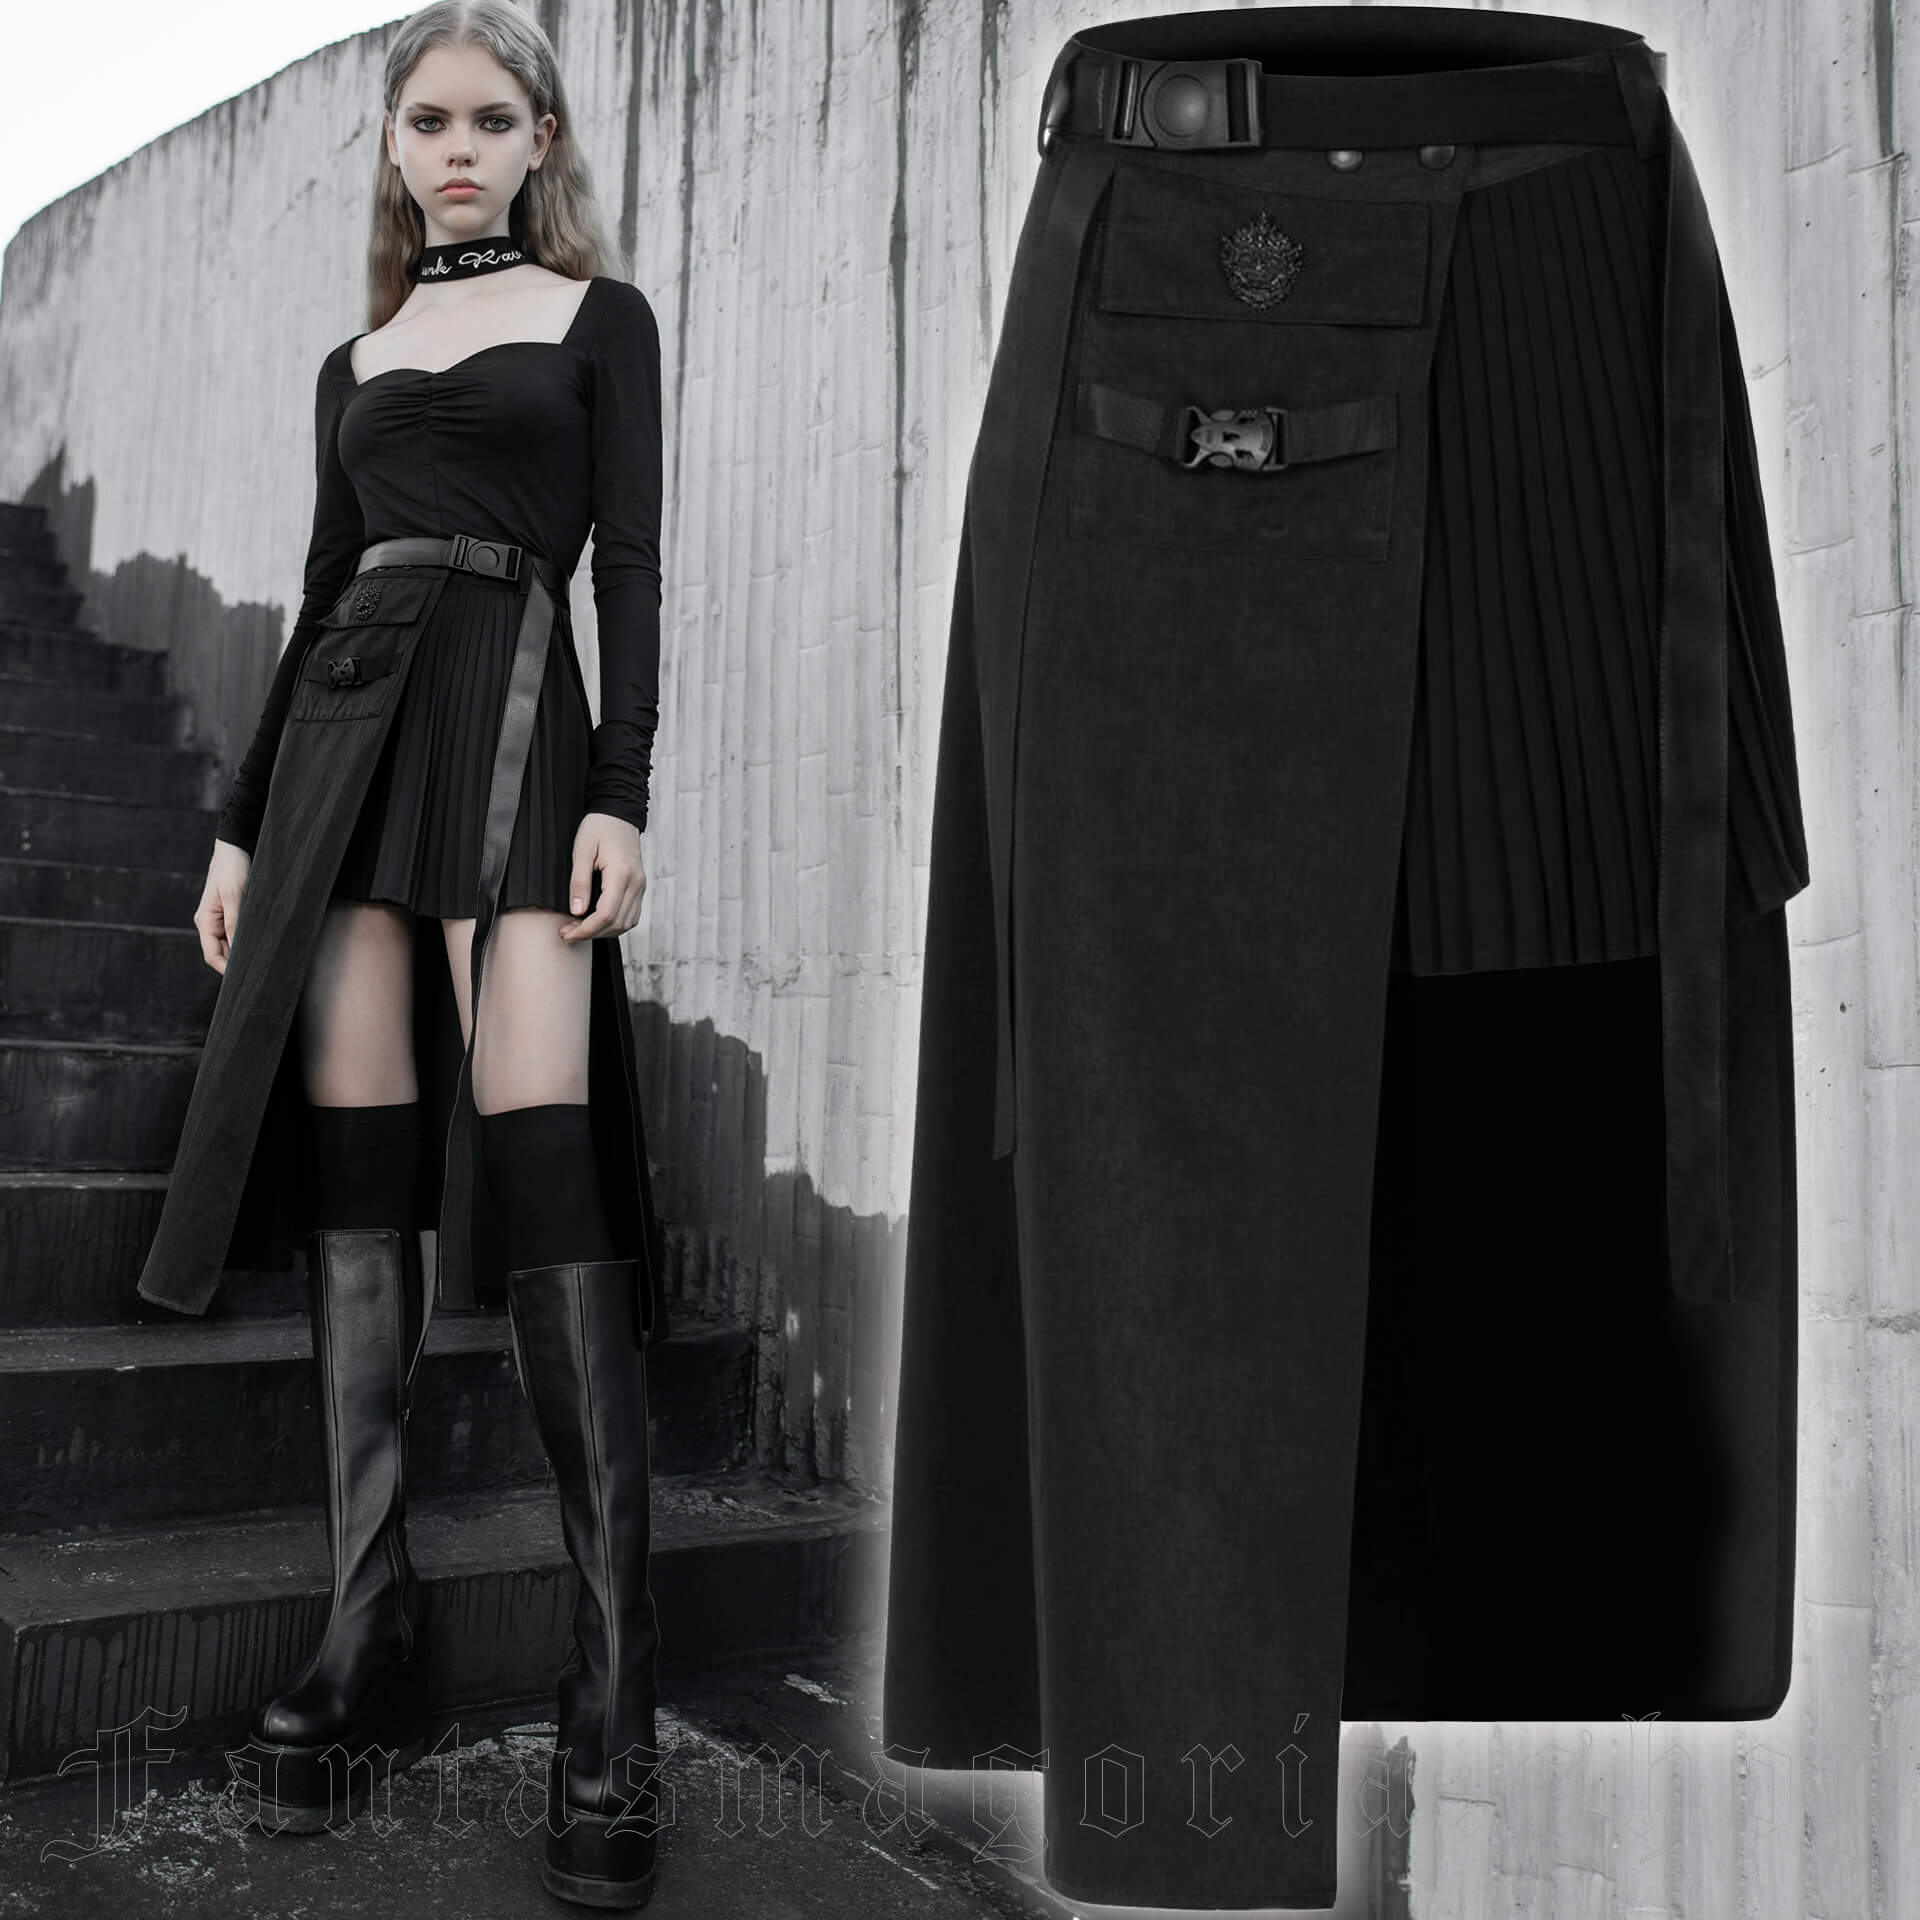 Nu Goth Soft Grunge long pleated black skirt by Punk Rave